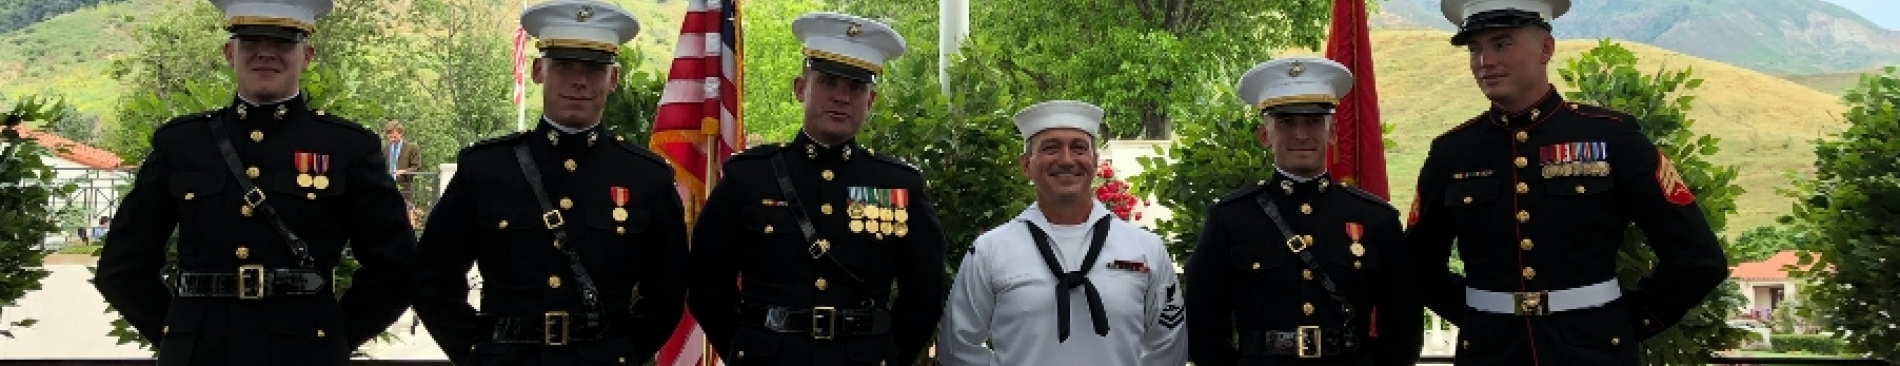 Alumnus Presents Two Graduates with Marine Corps Commissions